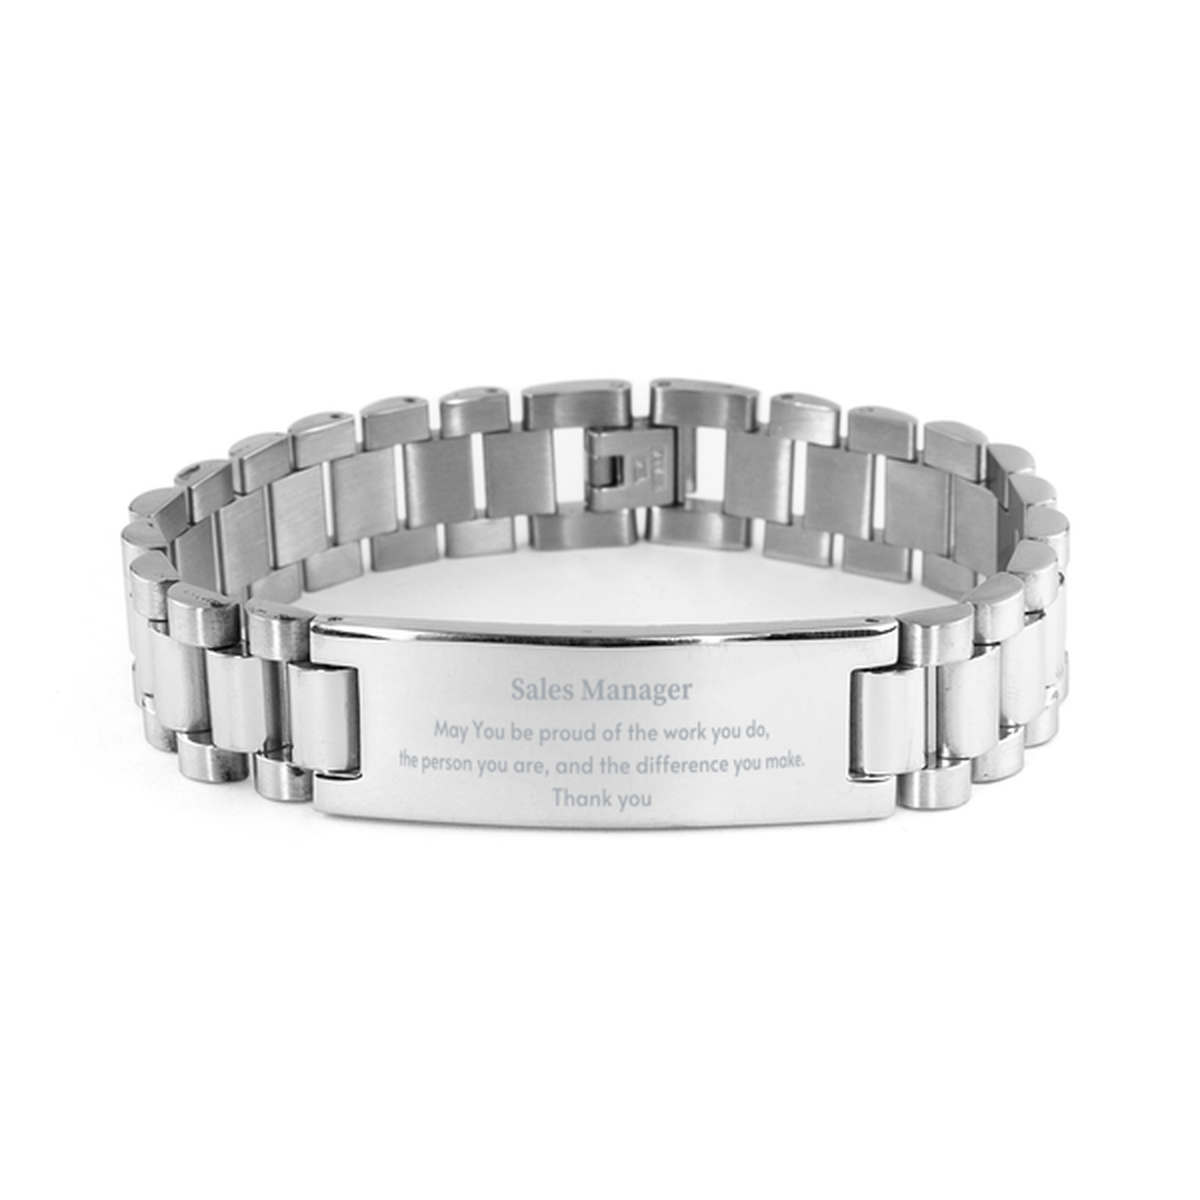 Heartwarming Ladder Stainless Steel Bracelet Retirement Coworkers Gifts for Sales Manager, Sales Manager May You be proud of the work you do, the person you are Gifts for Boss Men Women Friends